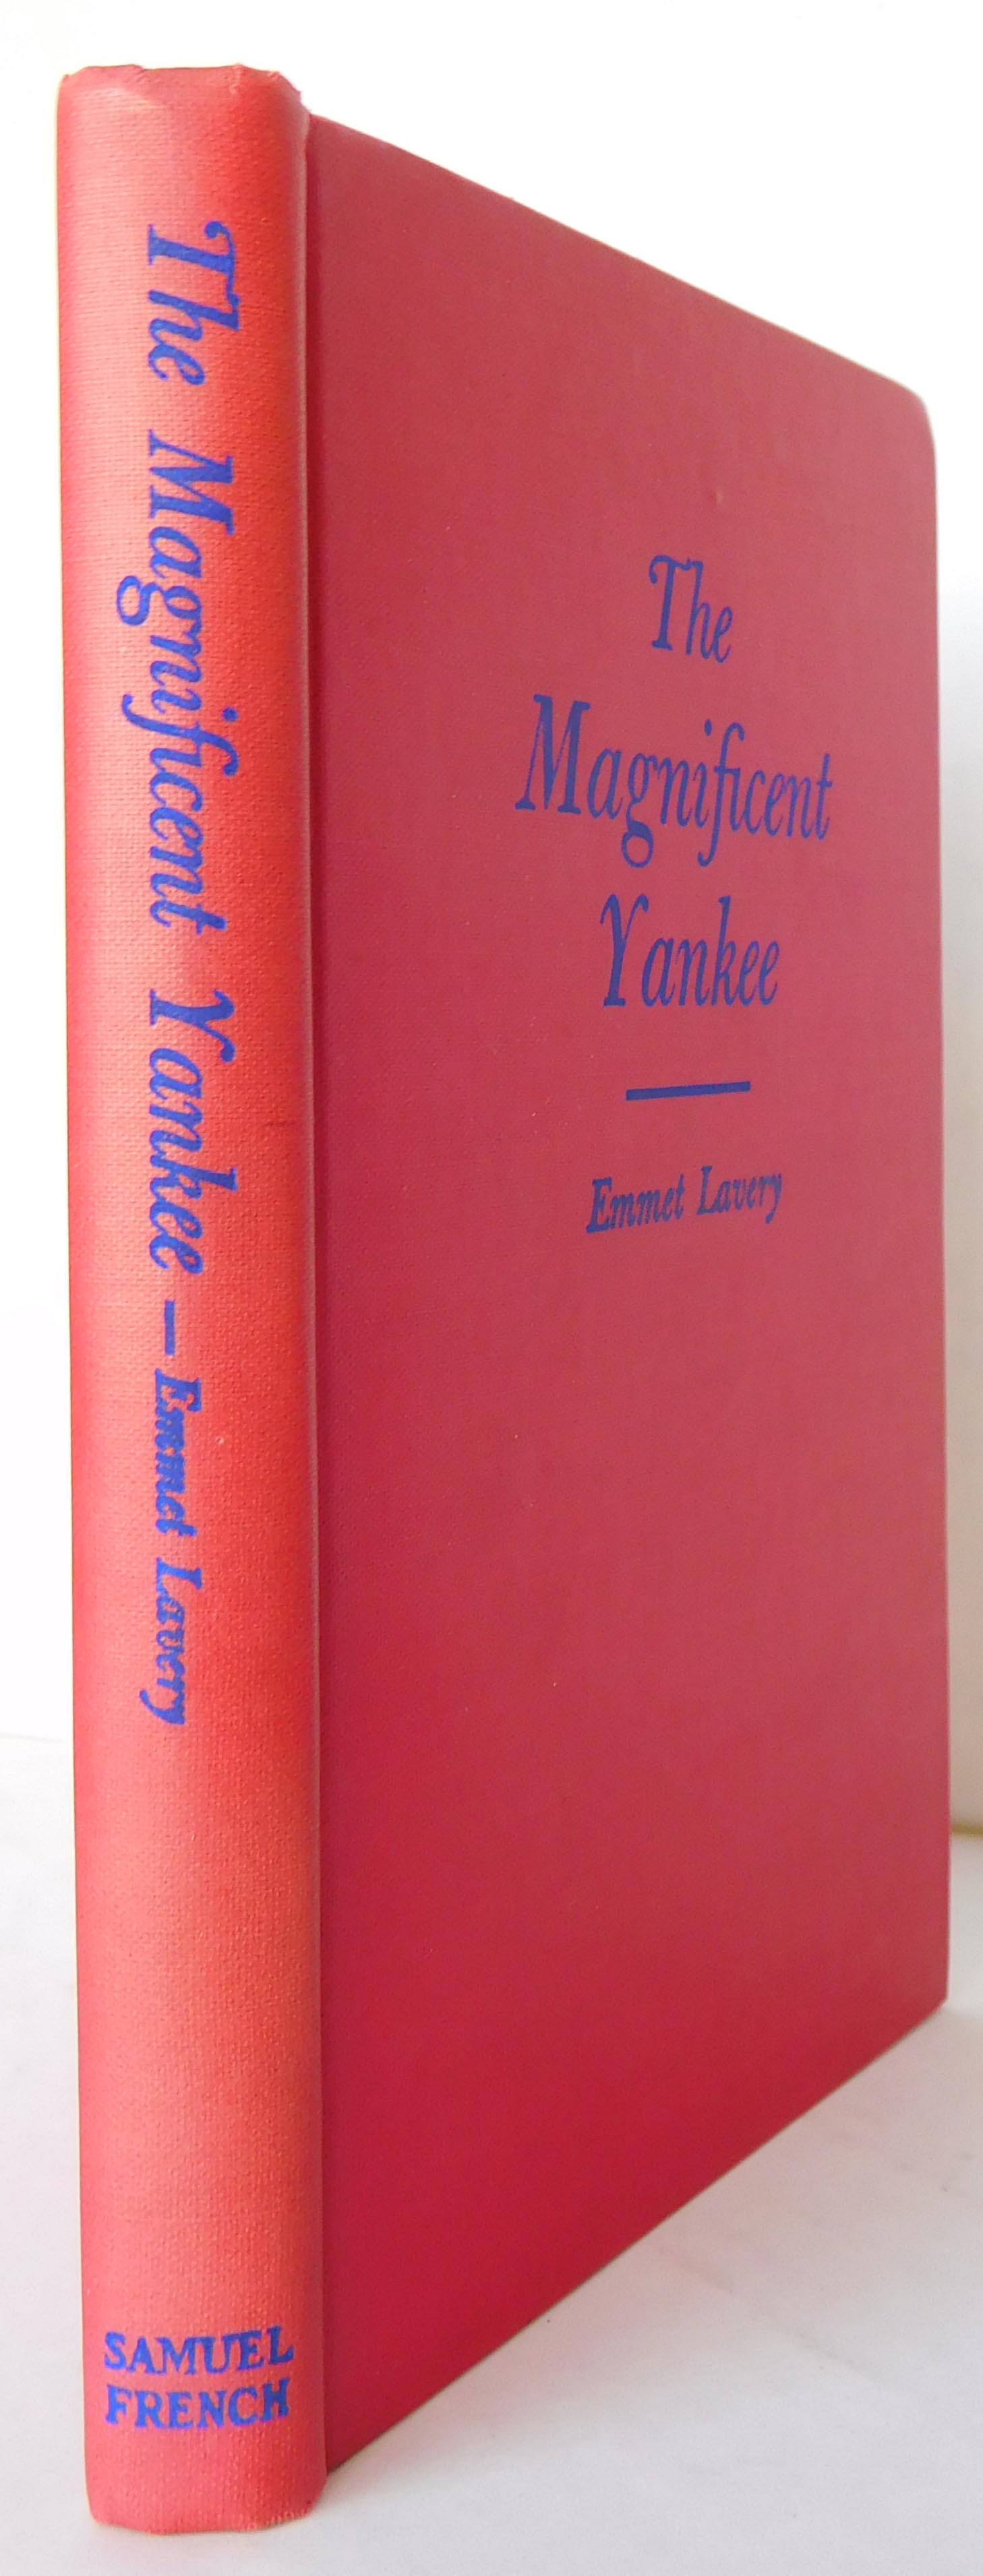 Lavery, Emmet - The Magnificent Yankee, A Play in Three Acts [presentation copy 